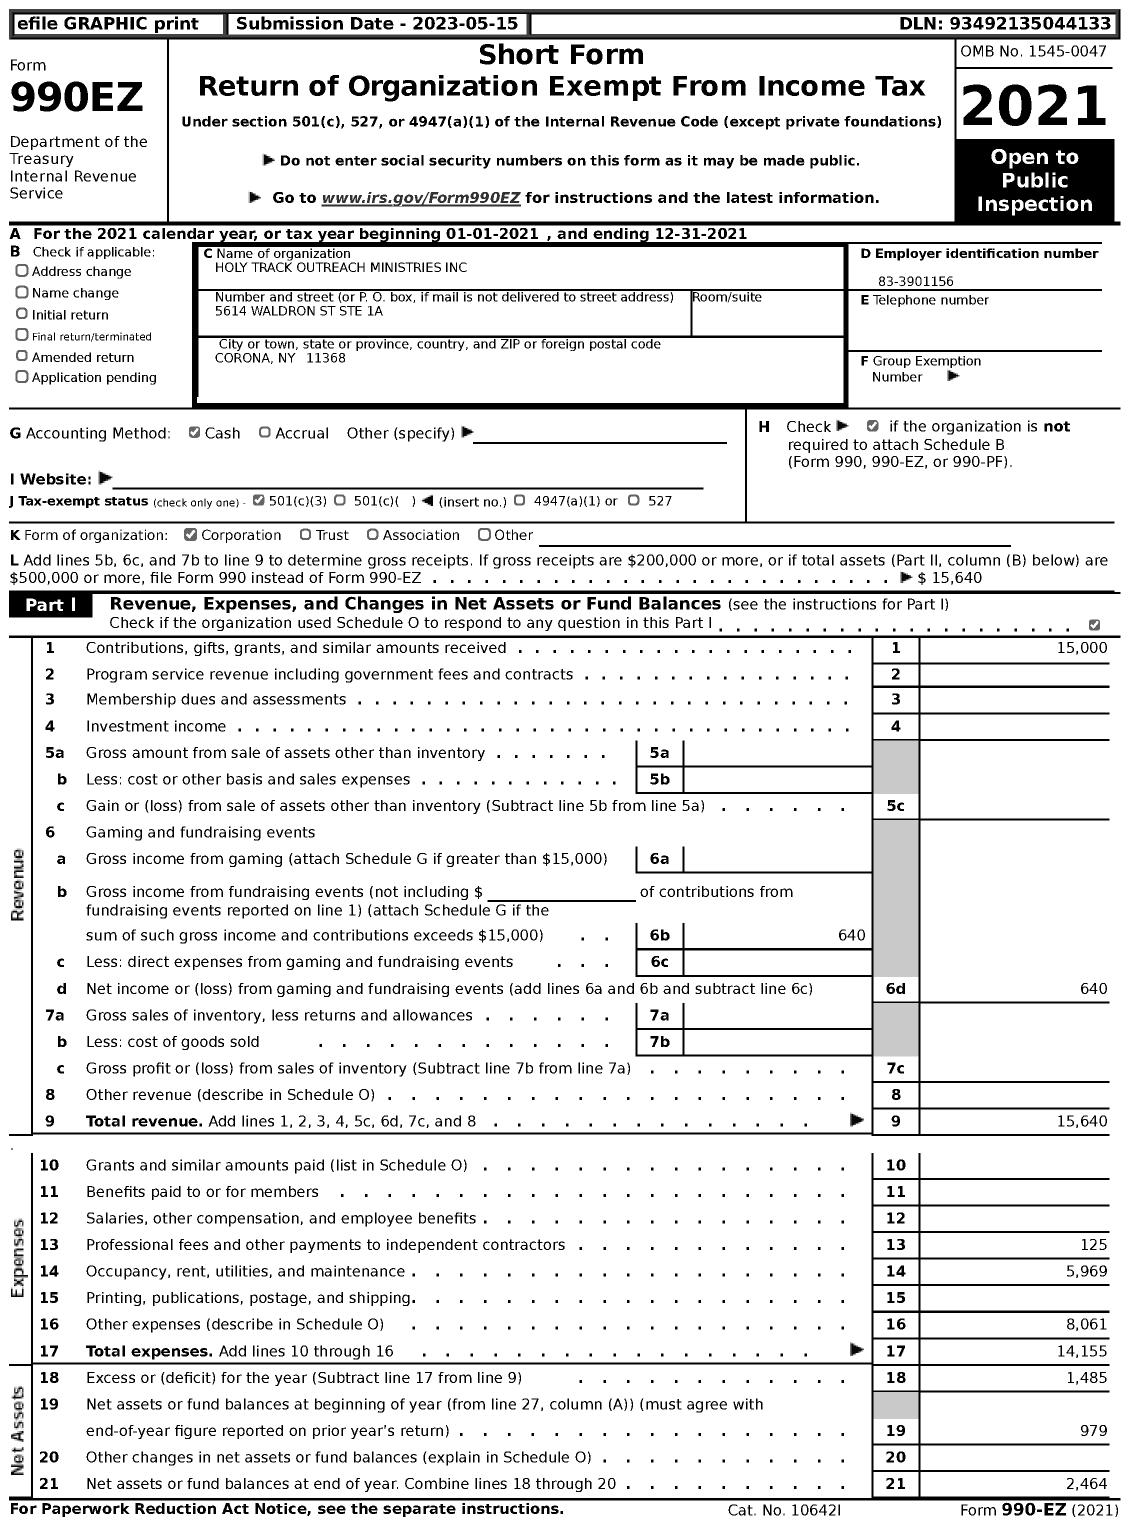 Image of first page of 2021 Form 990EZ for Holy Track Outreach Ministries